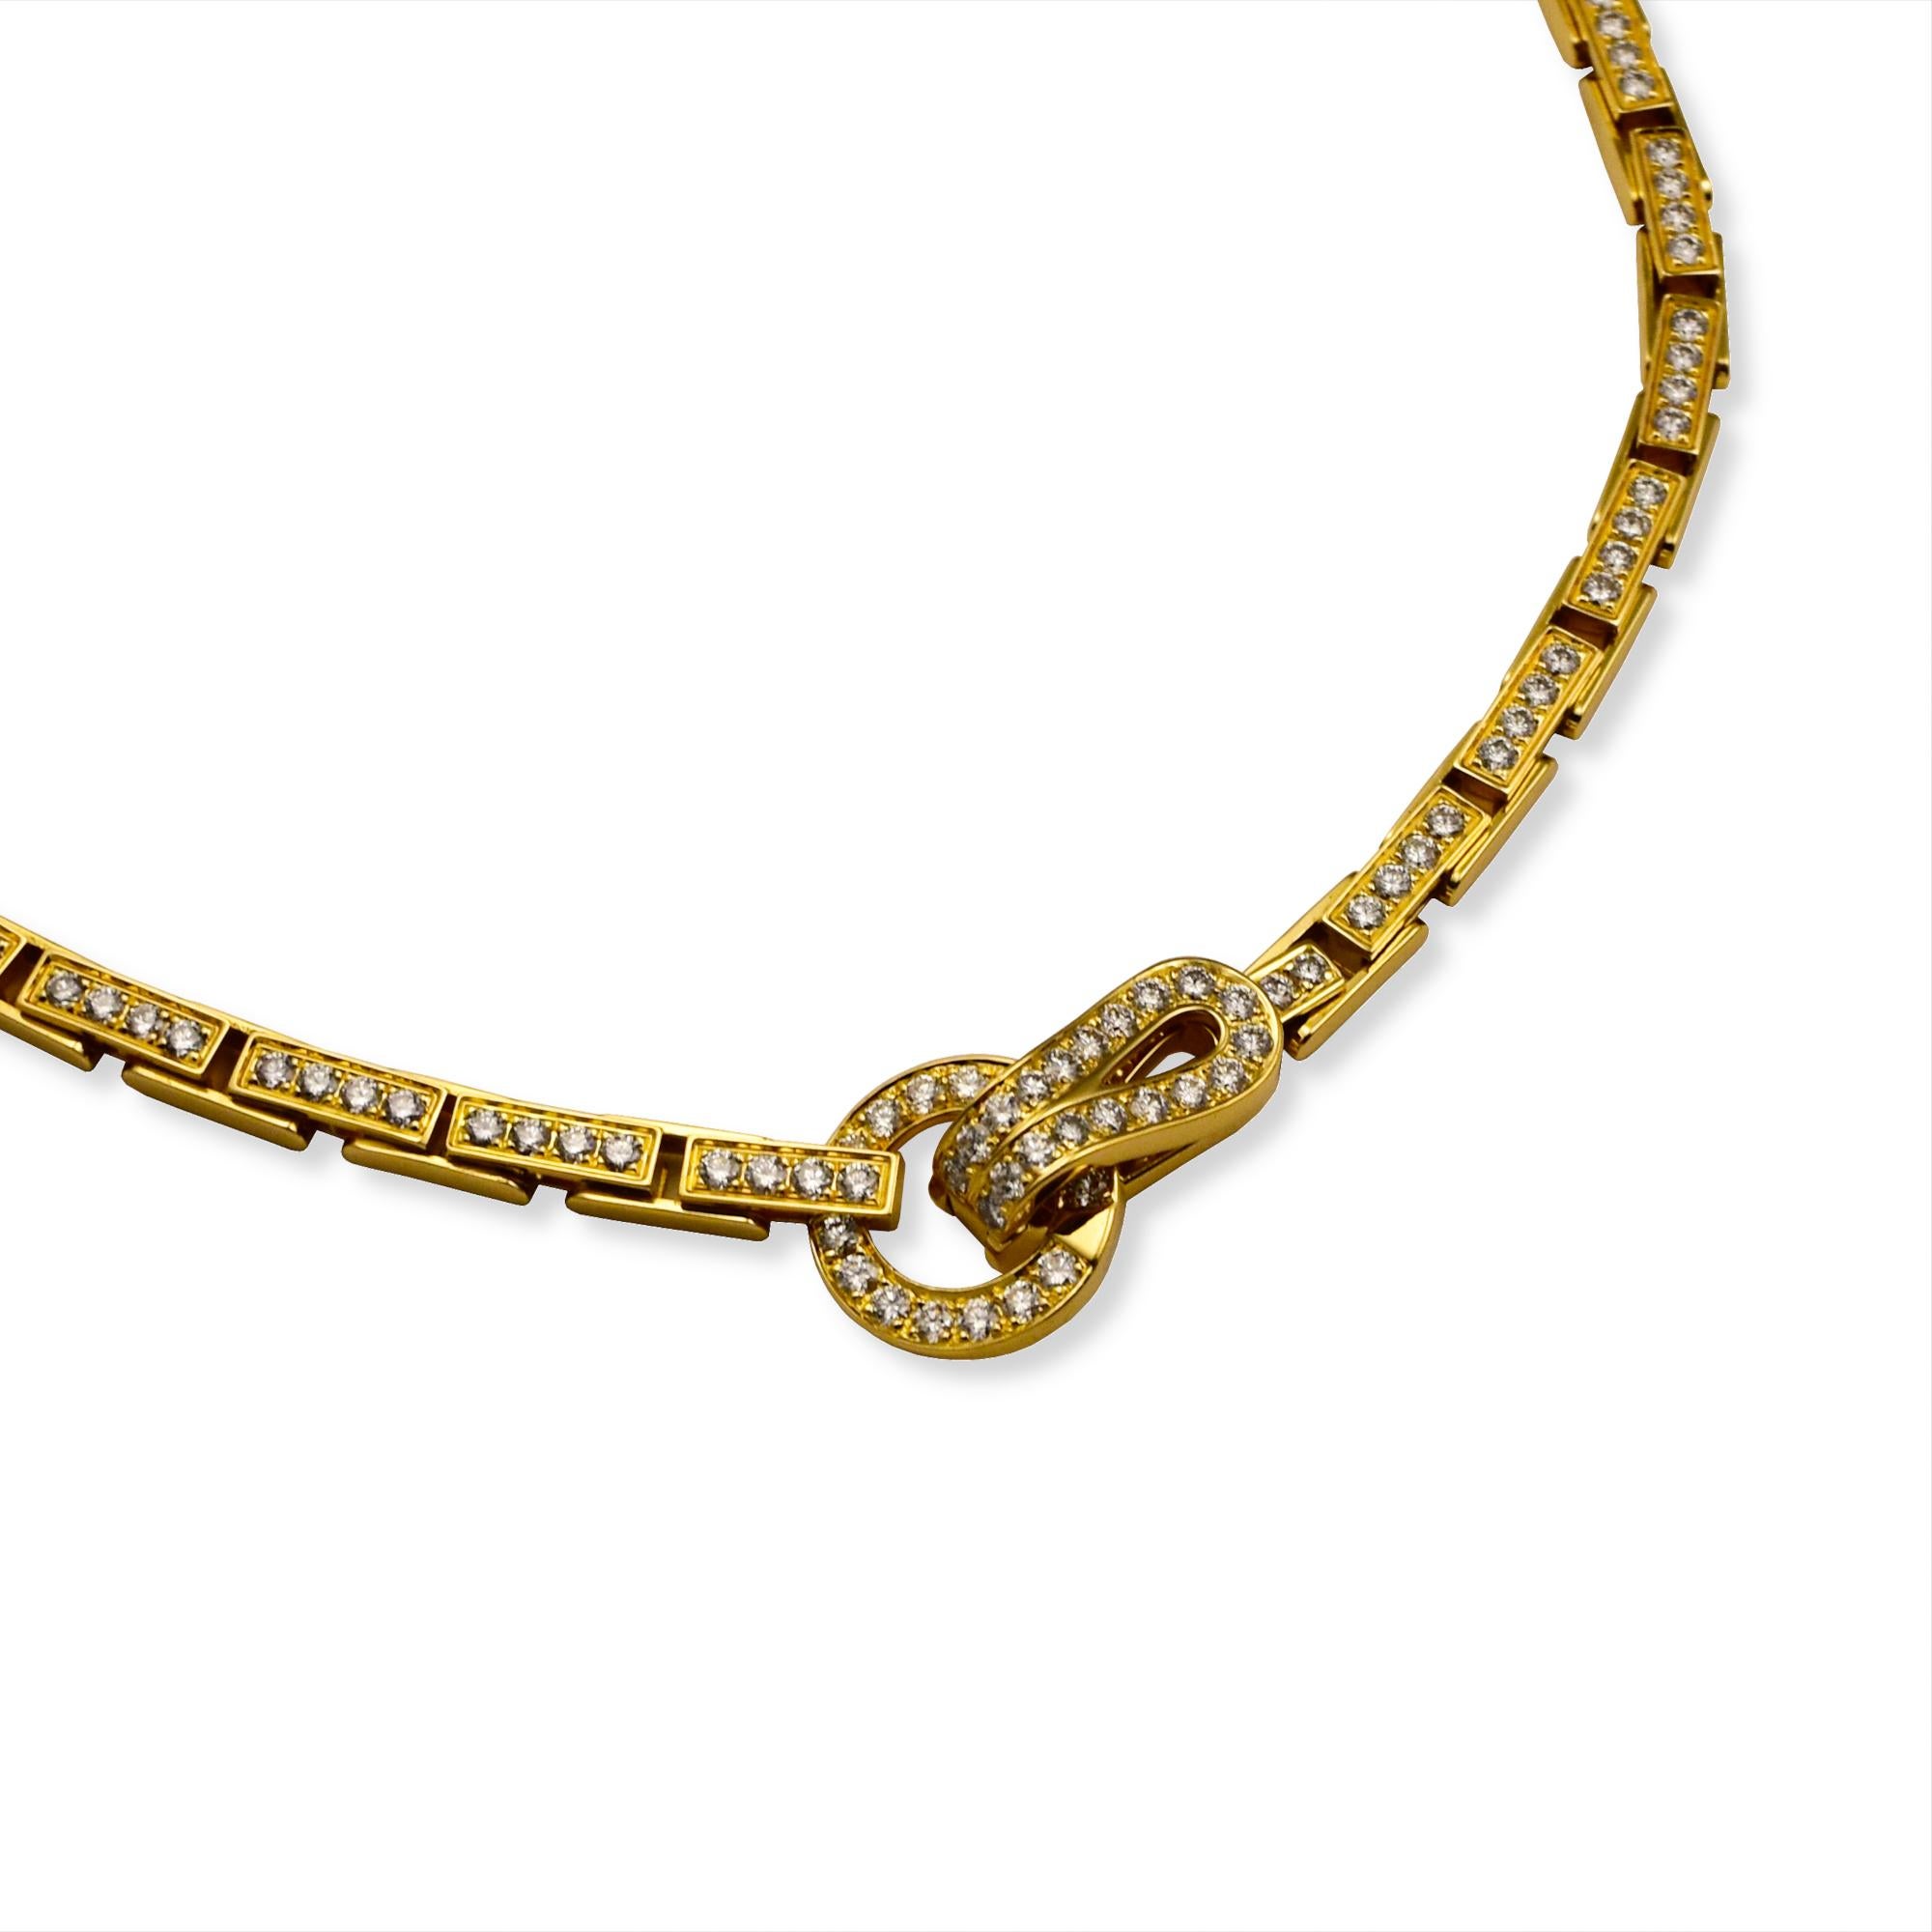 Brand: Cartier

Collection:  Agrafe

Style:  Pendant Necklace 

Metal: Yellow Gold

Metal Purity :18K

Stones: Round Brilliant Cut

Necklace Length:  15.5 inches 

Pendant Size:  1 inch 

Total Item Weight(Grams): 55.8 

Hallmark: Cartier; 18k;